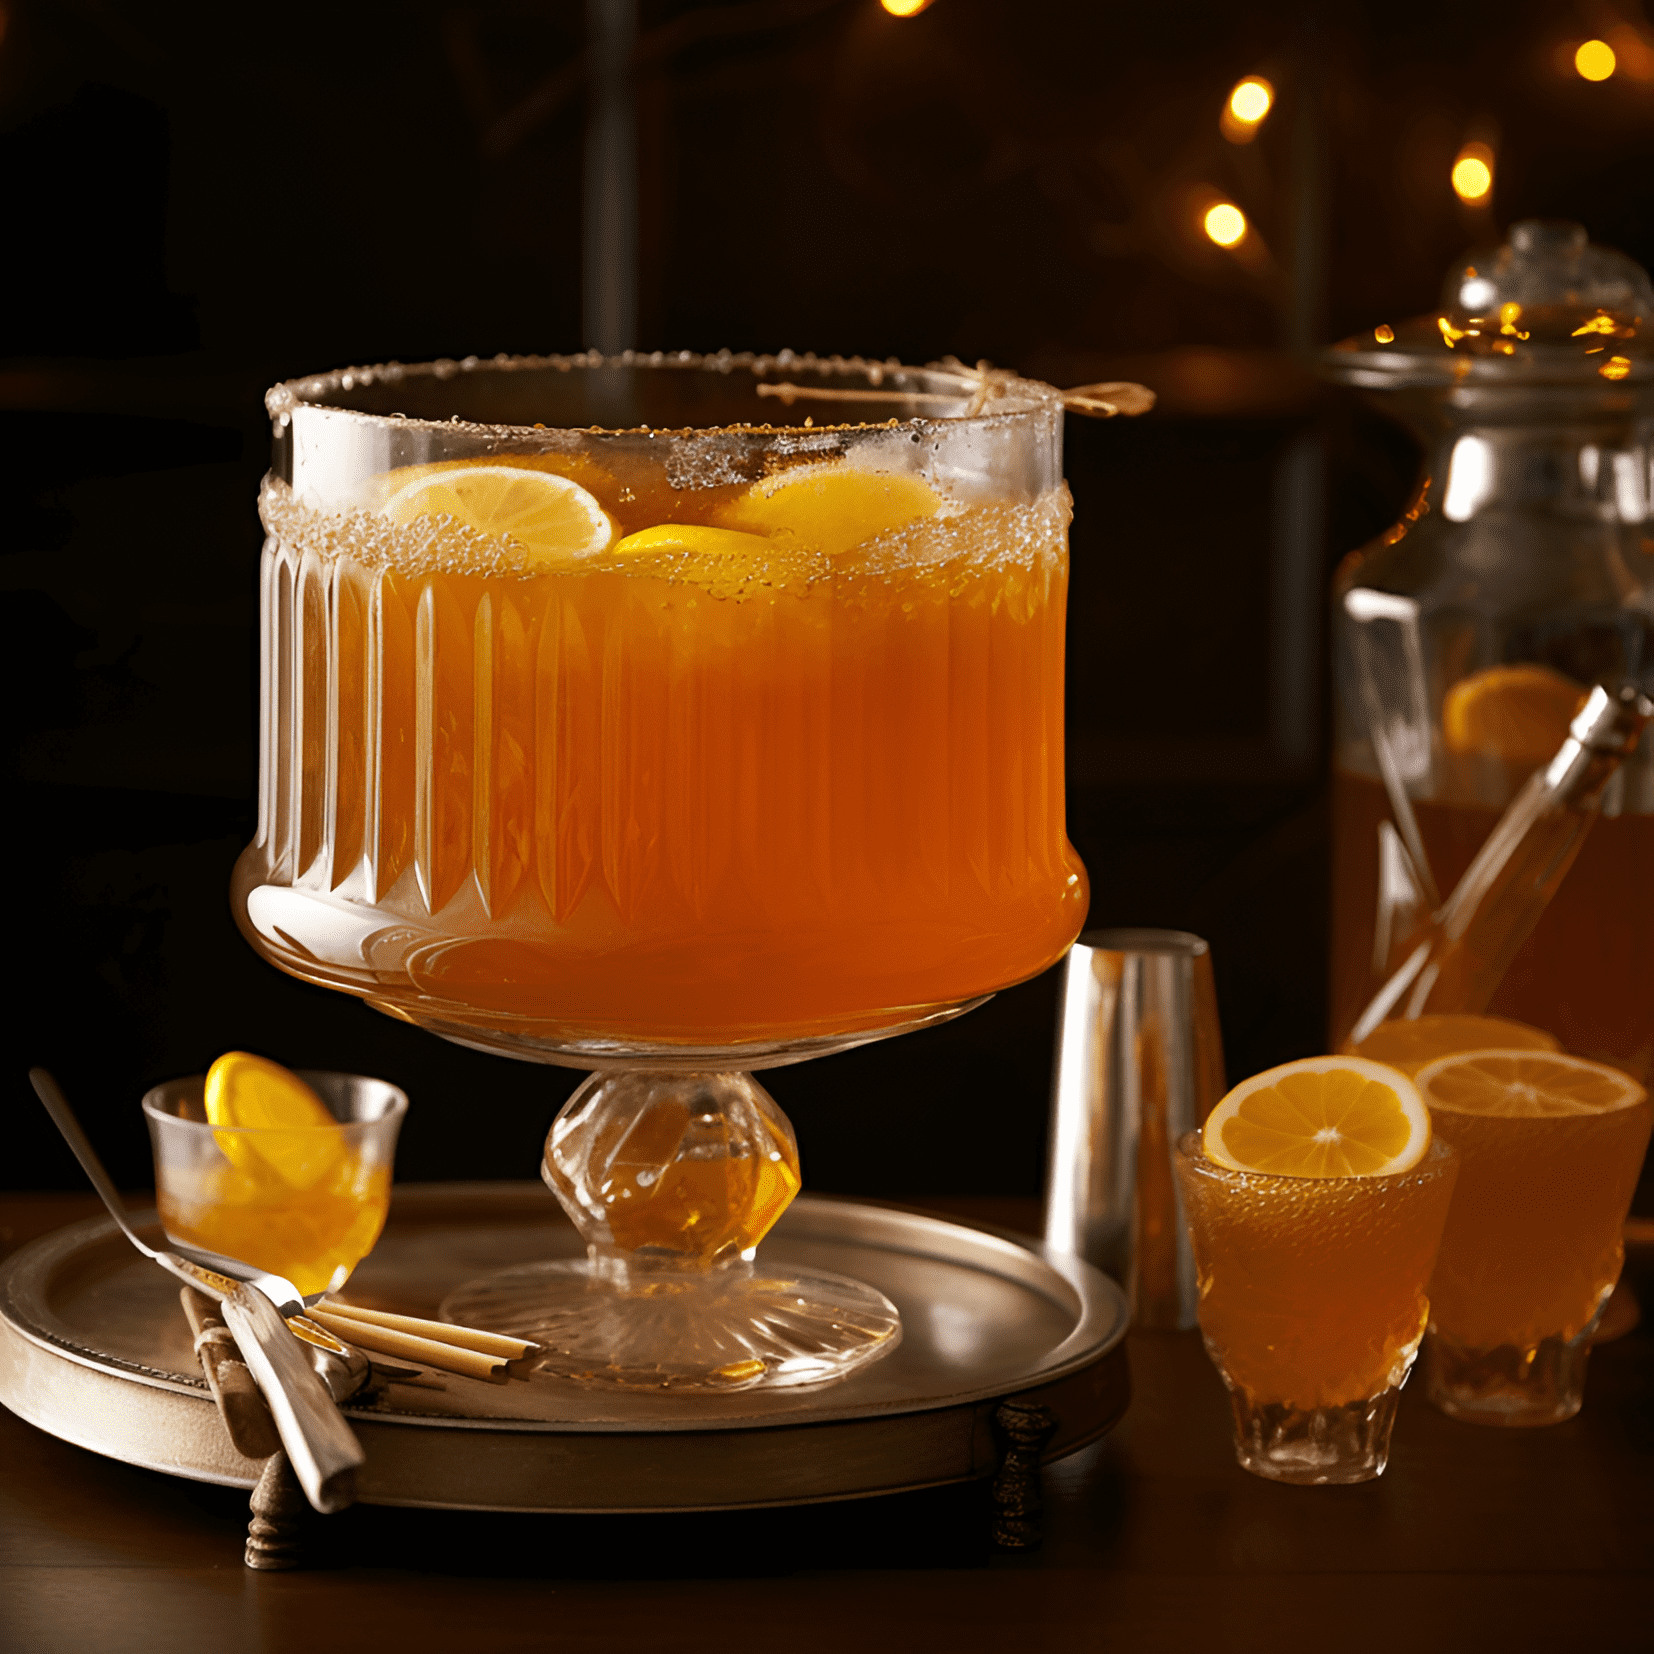 Fish House Punch Cocktail Recipe - Fish House Punch is a well-balanced cocktail with a mix of sweet, sour, and fruity flavors. It has a smooth, velvety texture and a pleasant warmth from the combination of rum, cognac, and peach brandy.